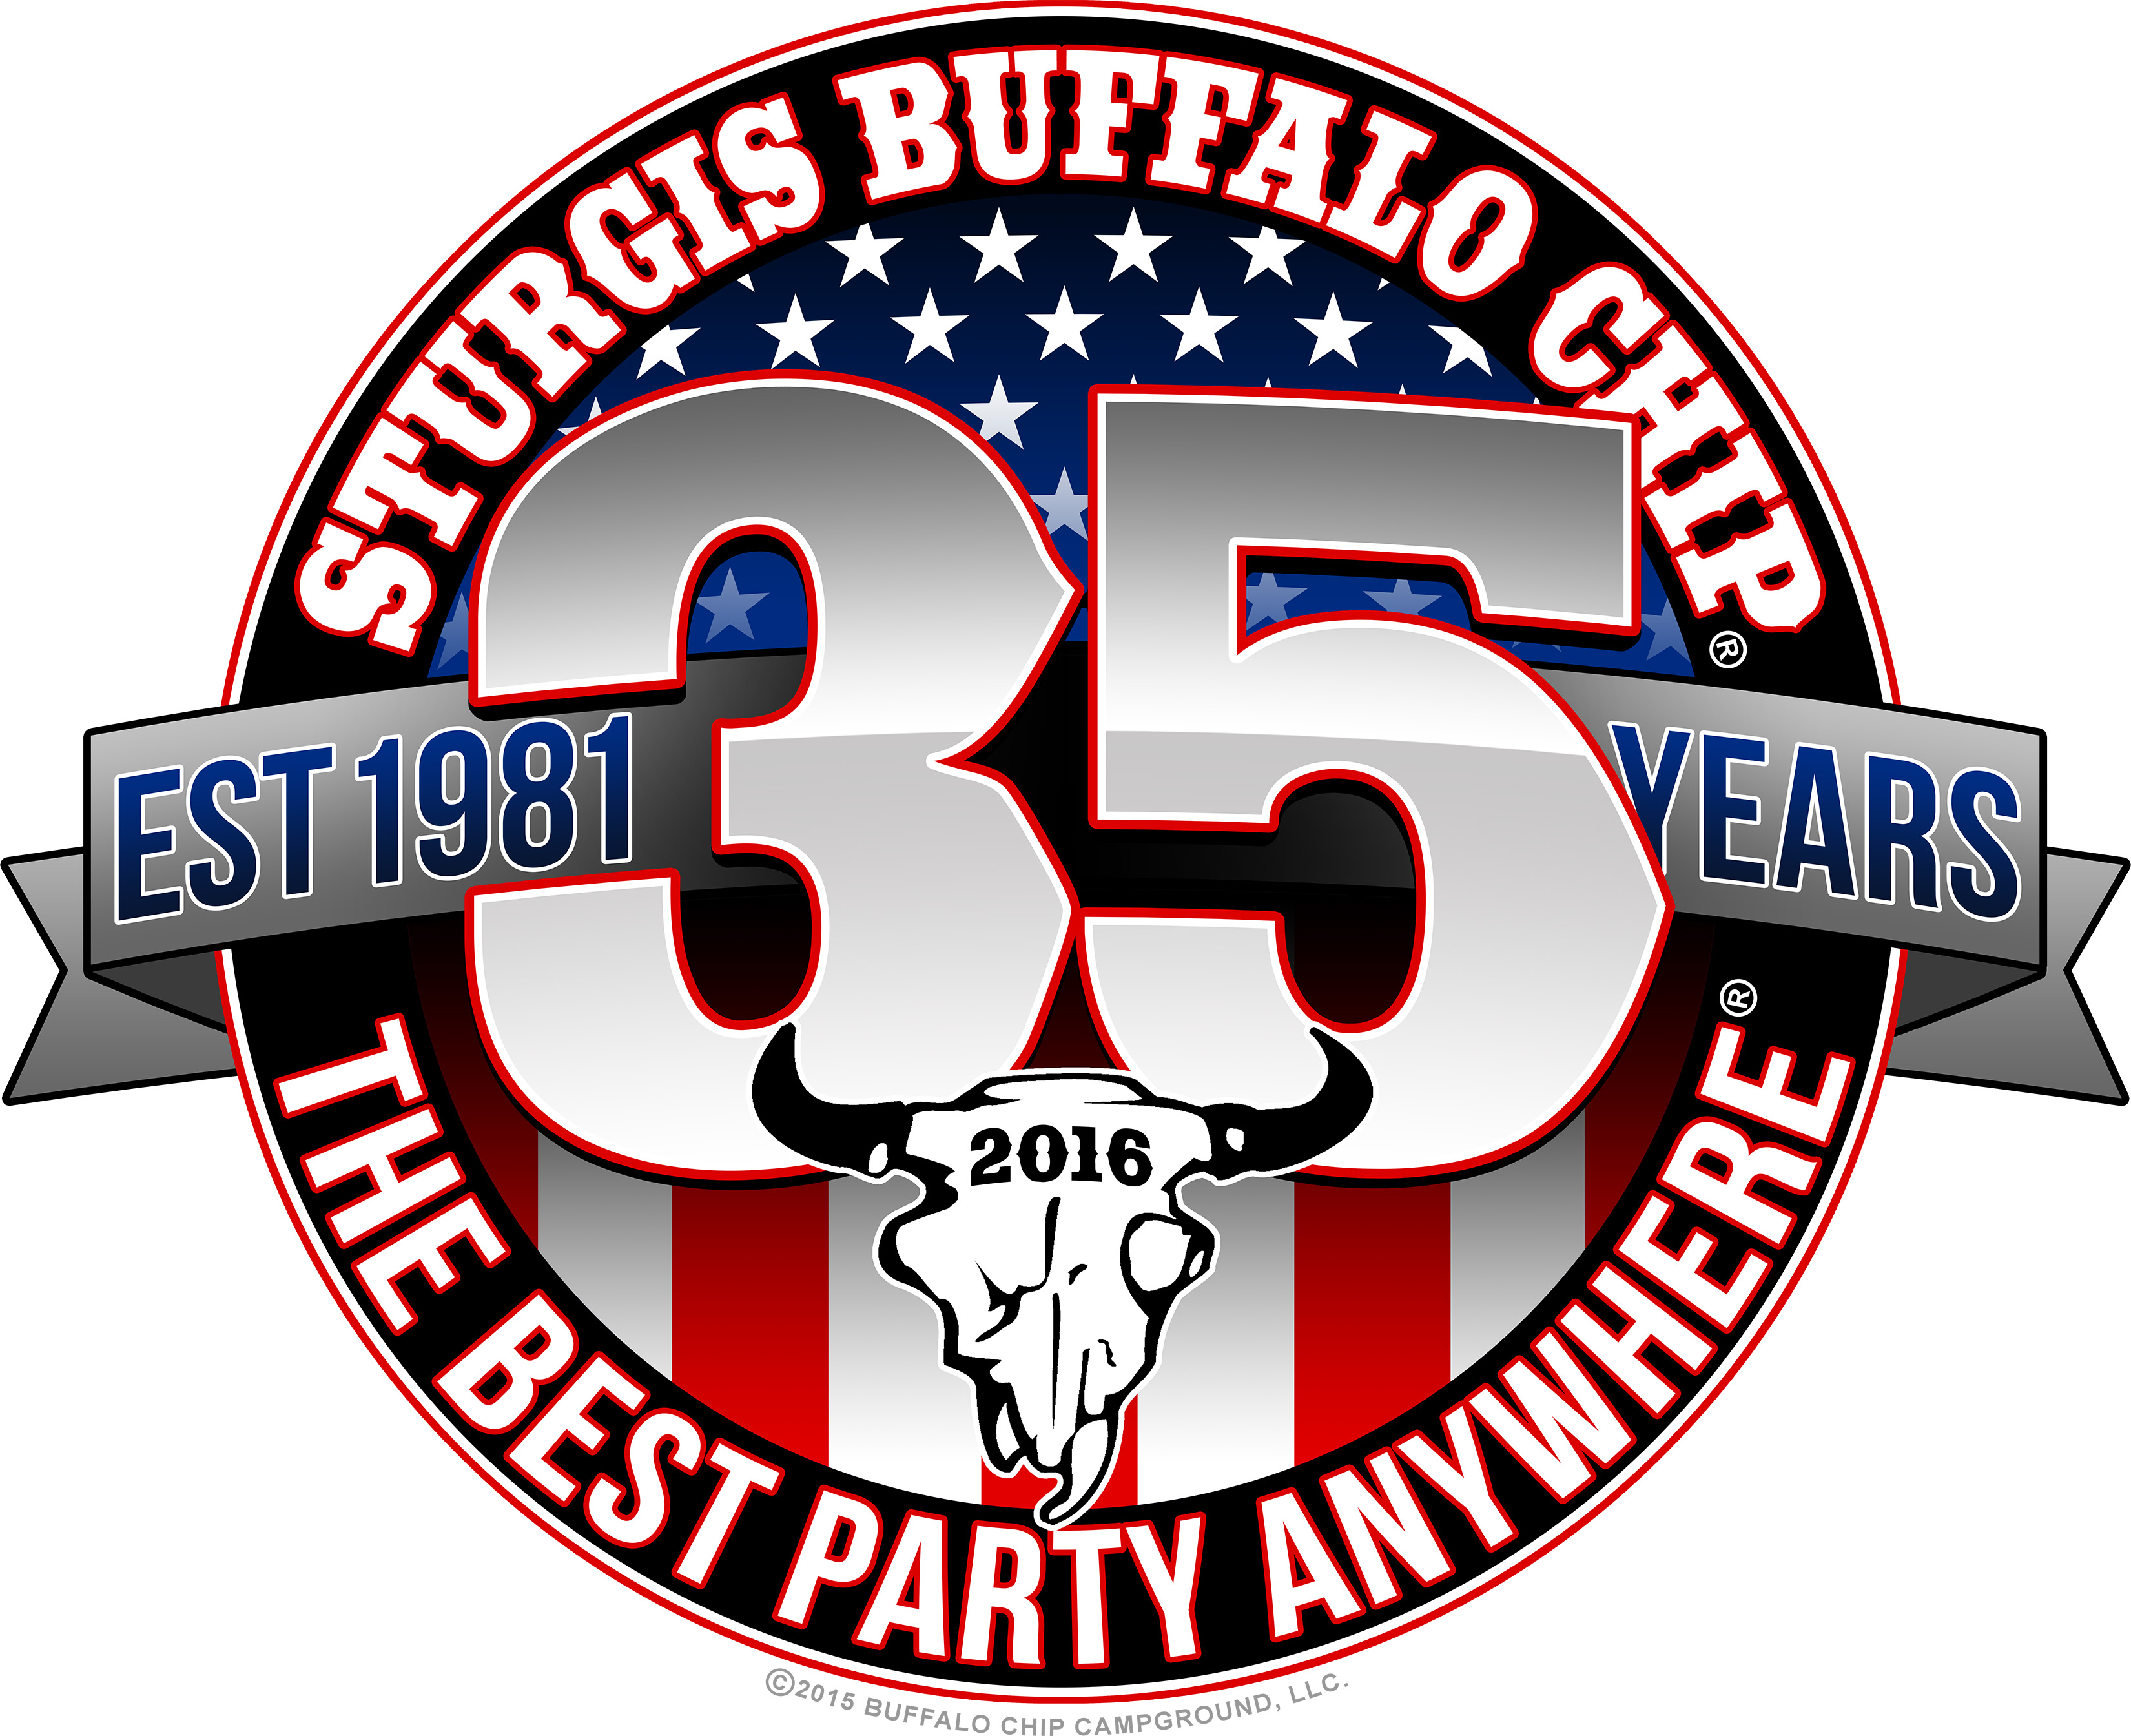 The Sturgis Buffalo Chip celebrates its 35th anniversary with a blowout party in 2016.